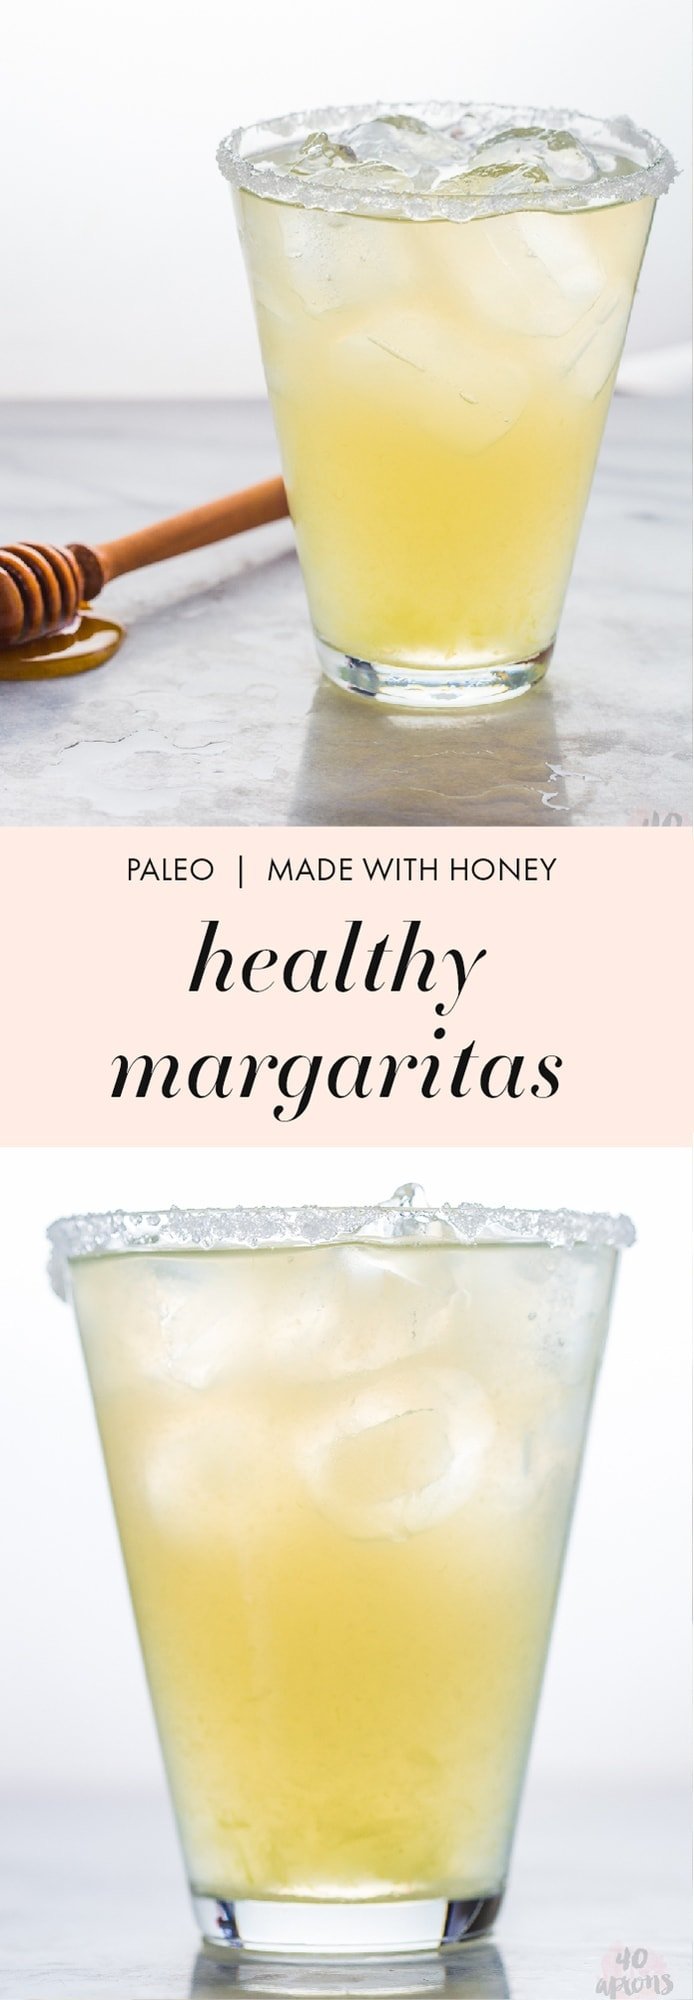 These paleo healthy margaritas are made with simple ingredients: lime juice, honey, water, and booze. Sugar free and paleo (I mean... tequila is pretty much paleo, right?), they're the closest thing to healthy margaritas that exist! Ideal for Cinco de Mayo or any fiesta occasion (slash random weekday), you'll fall in love with how super quick and easy these healthy margaritas are, too. 